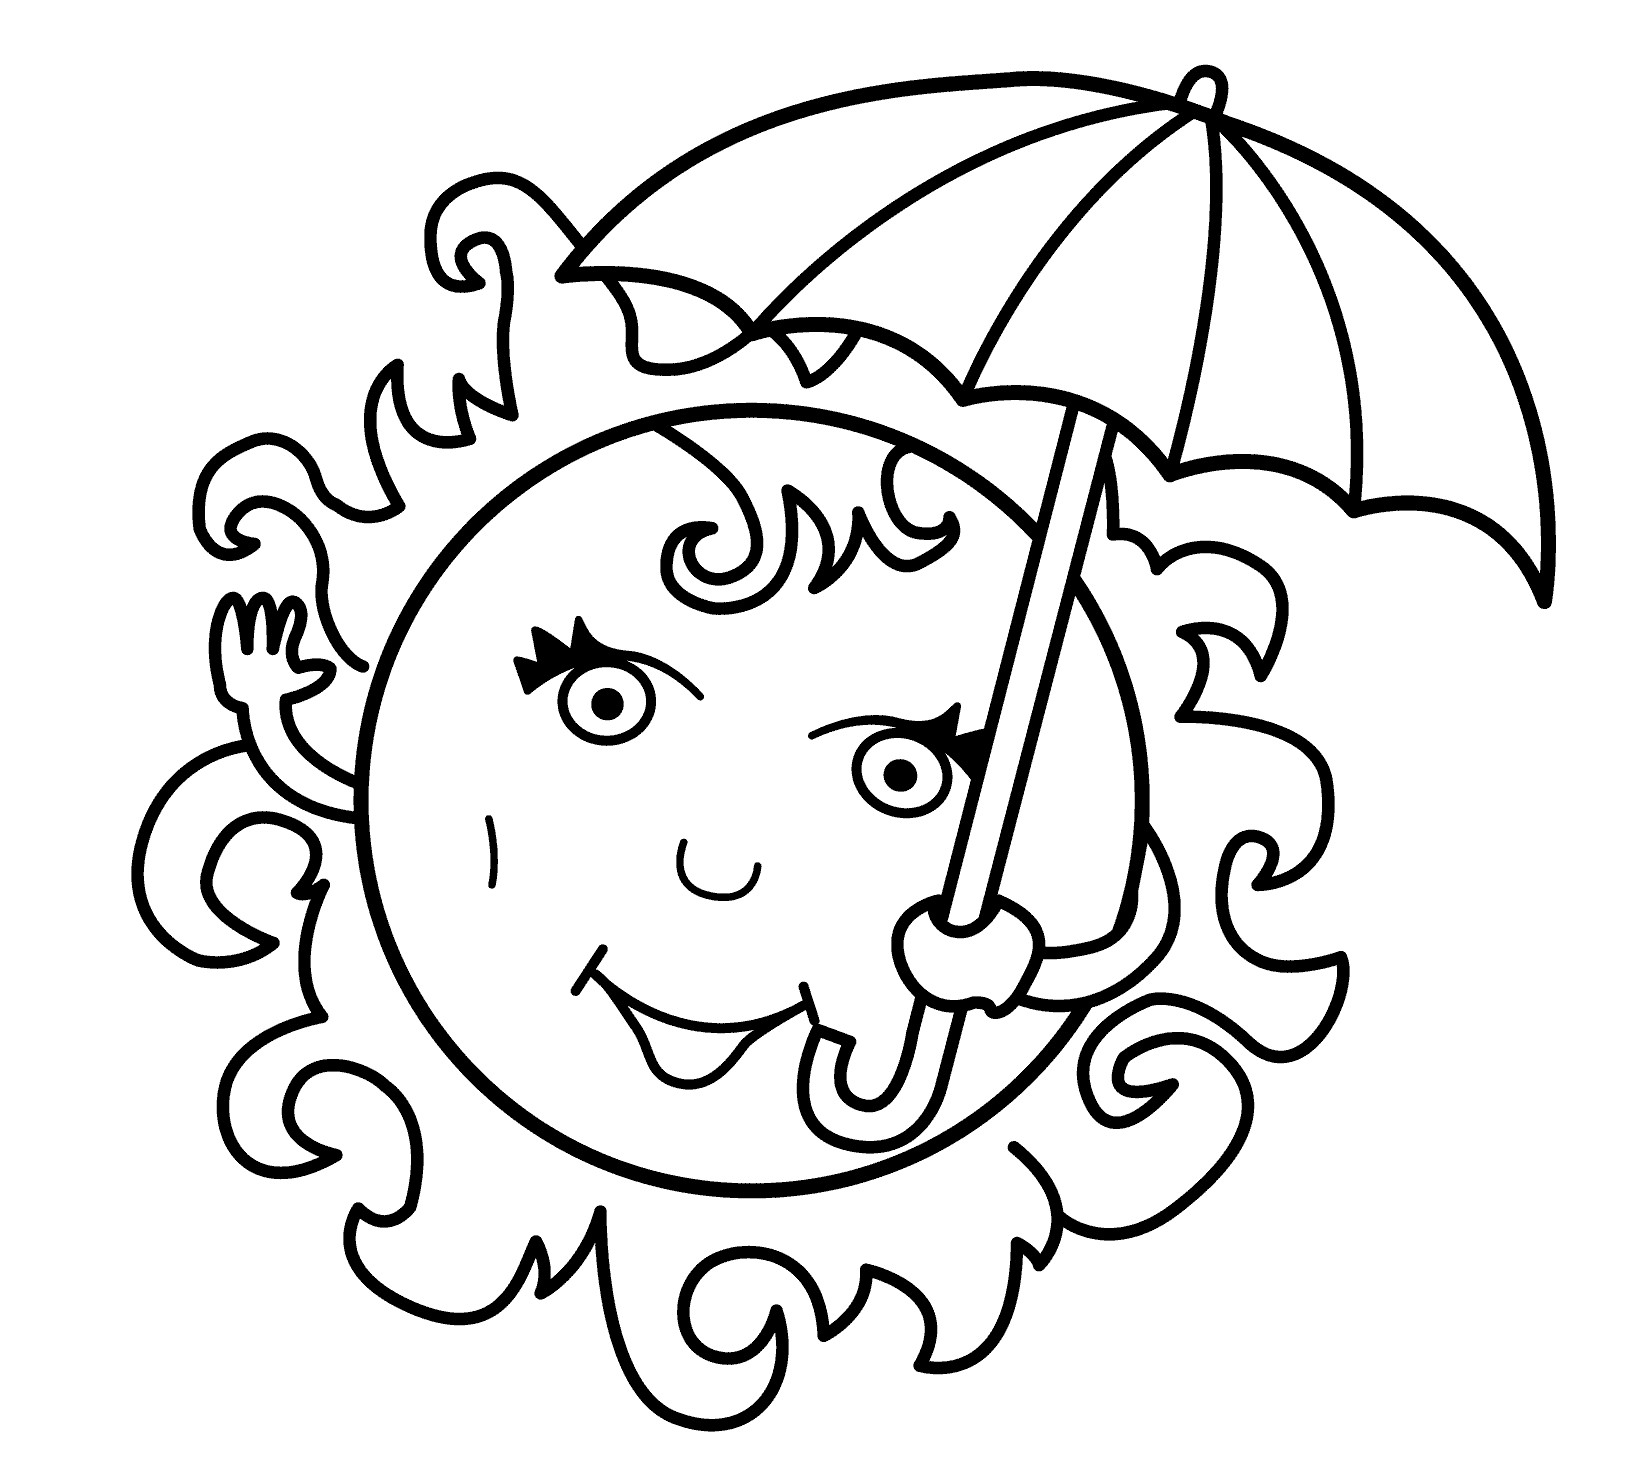 Printable Summer Coloring Pages
 Download Free Printable Summer Coloring Pages for Kids